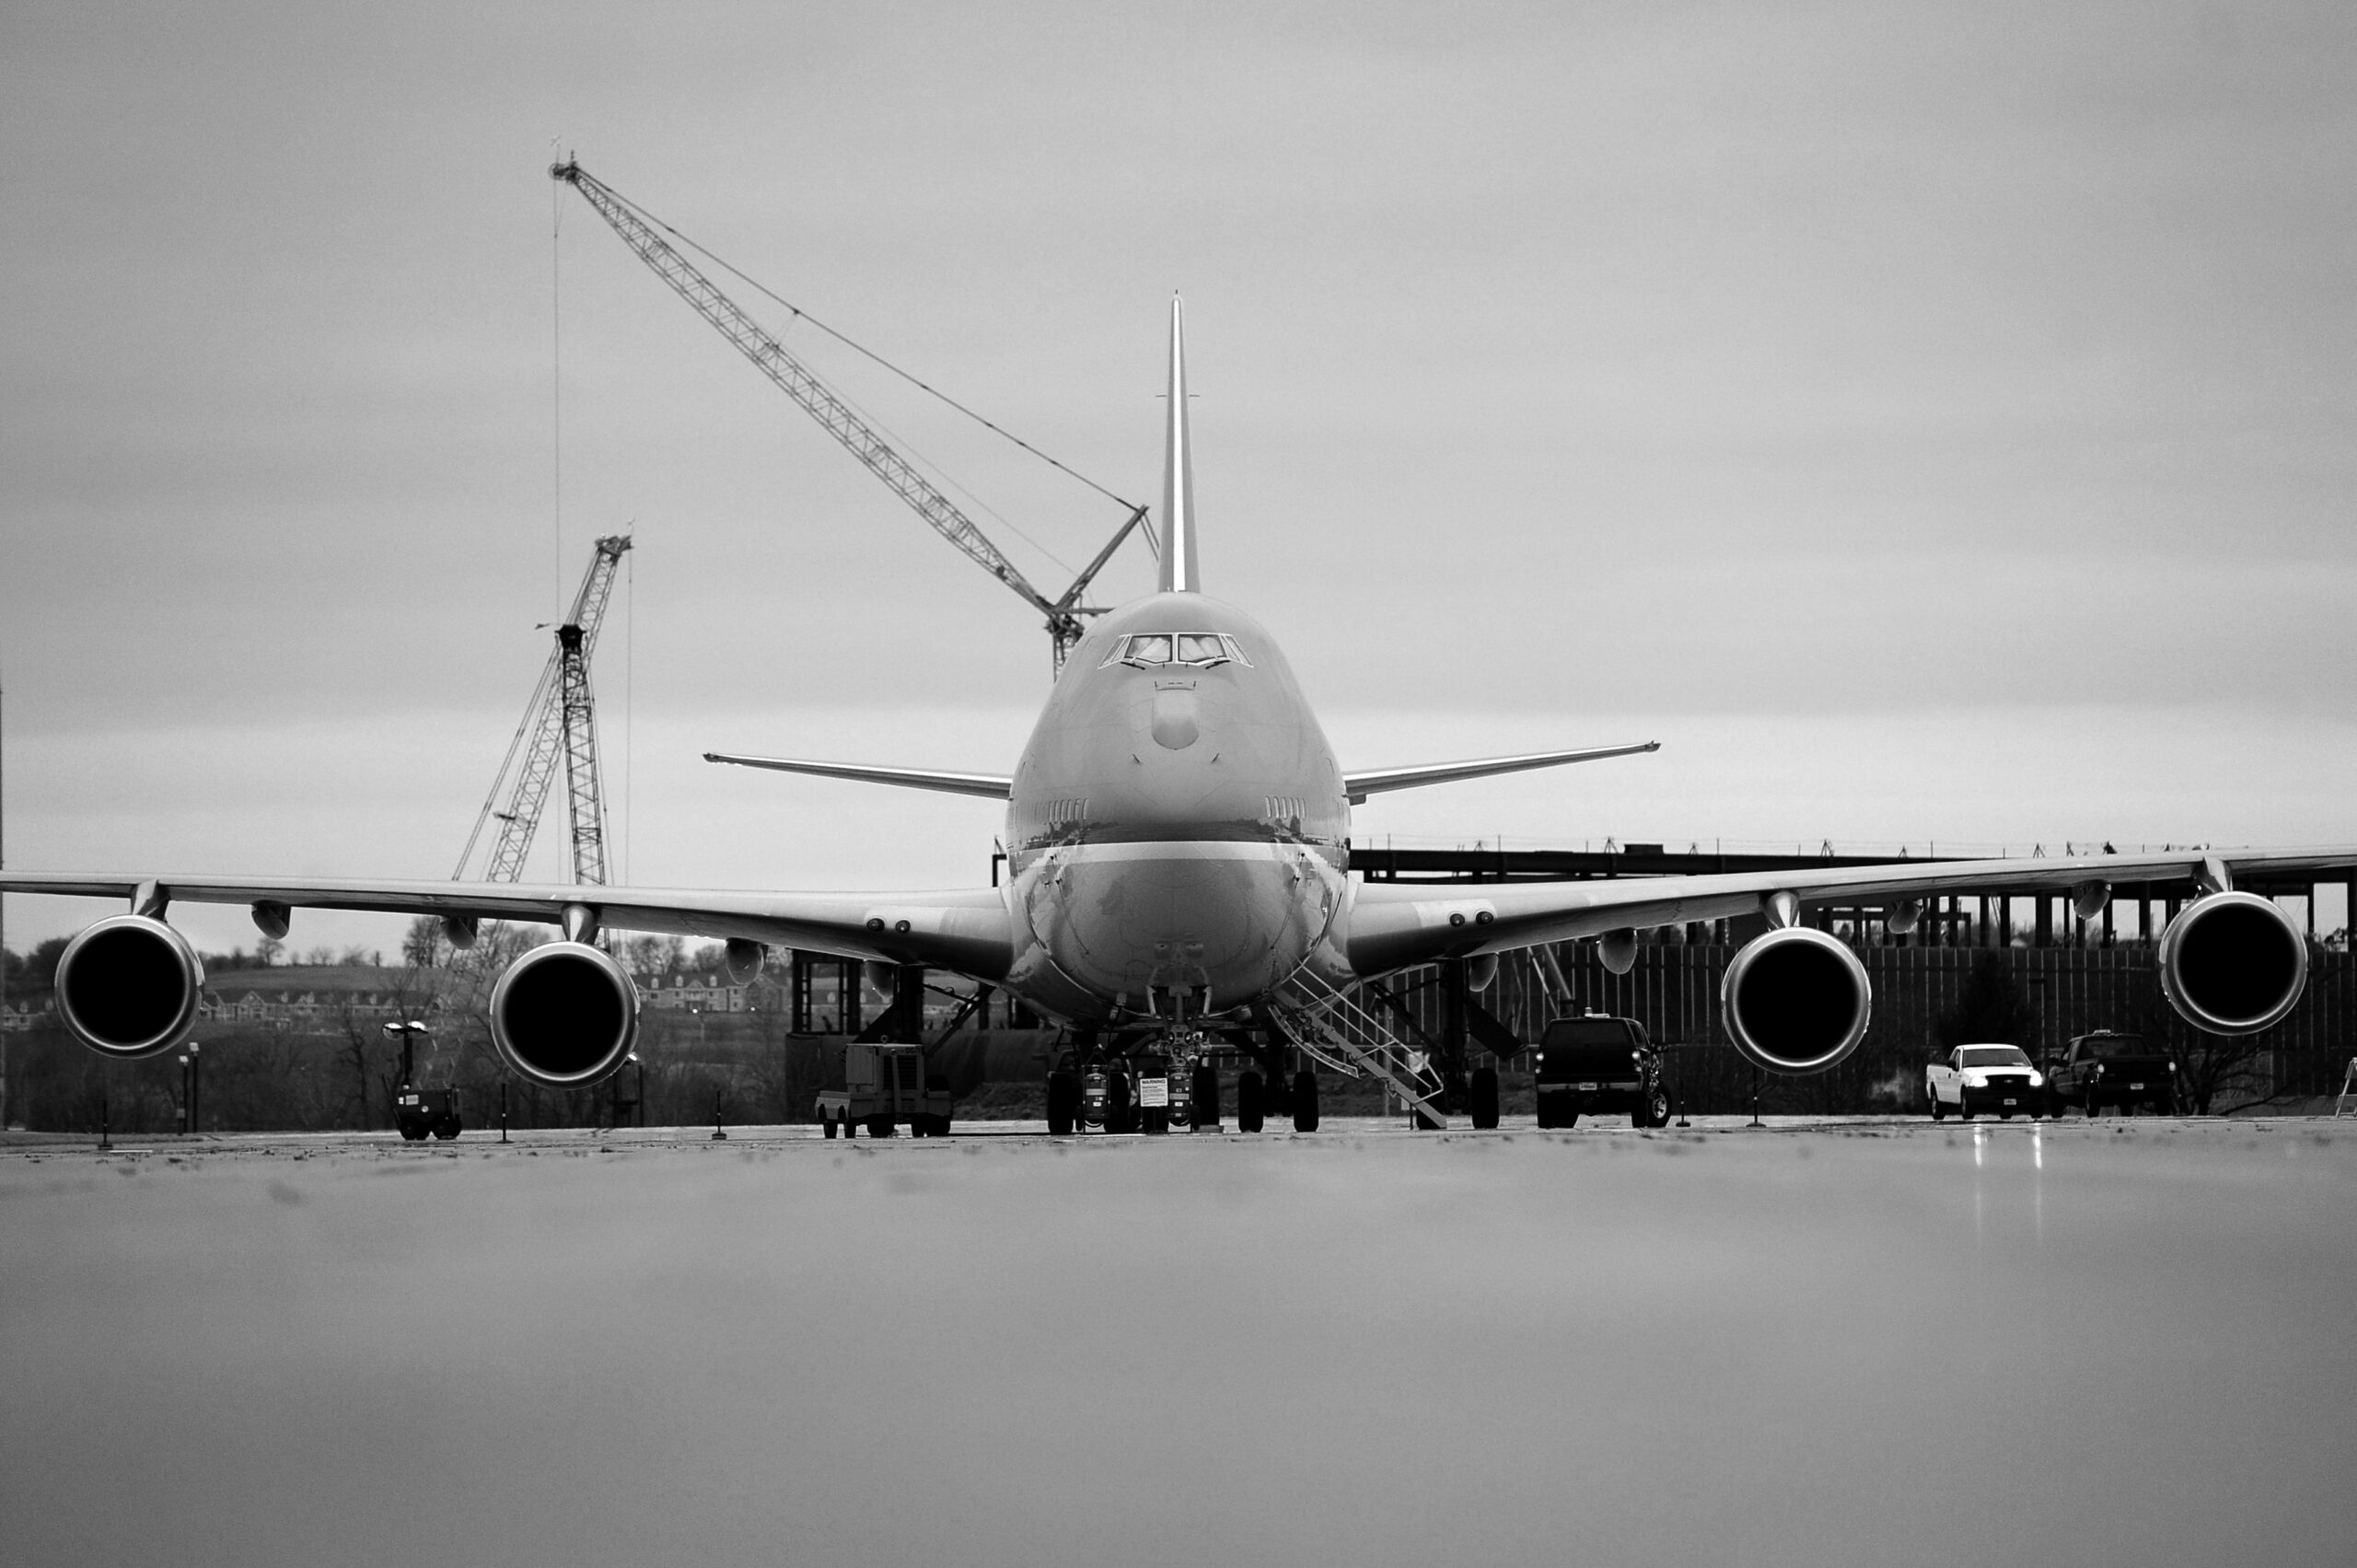 A VC-25A Air Force One aircraft sits on a ramp at Offutt Air Force Base,